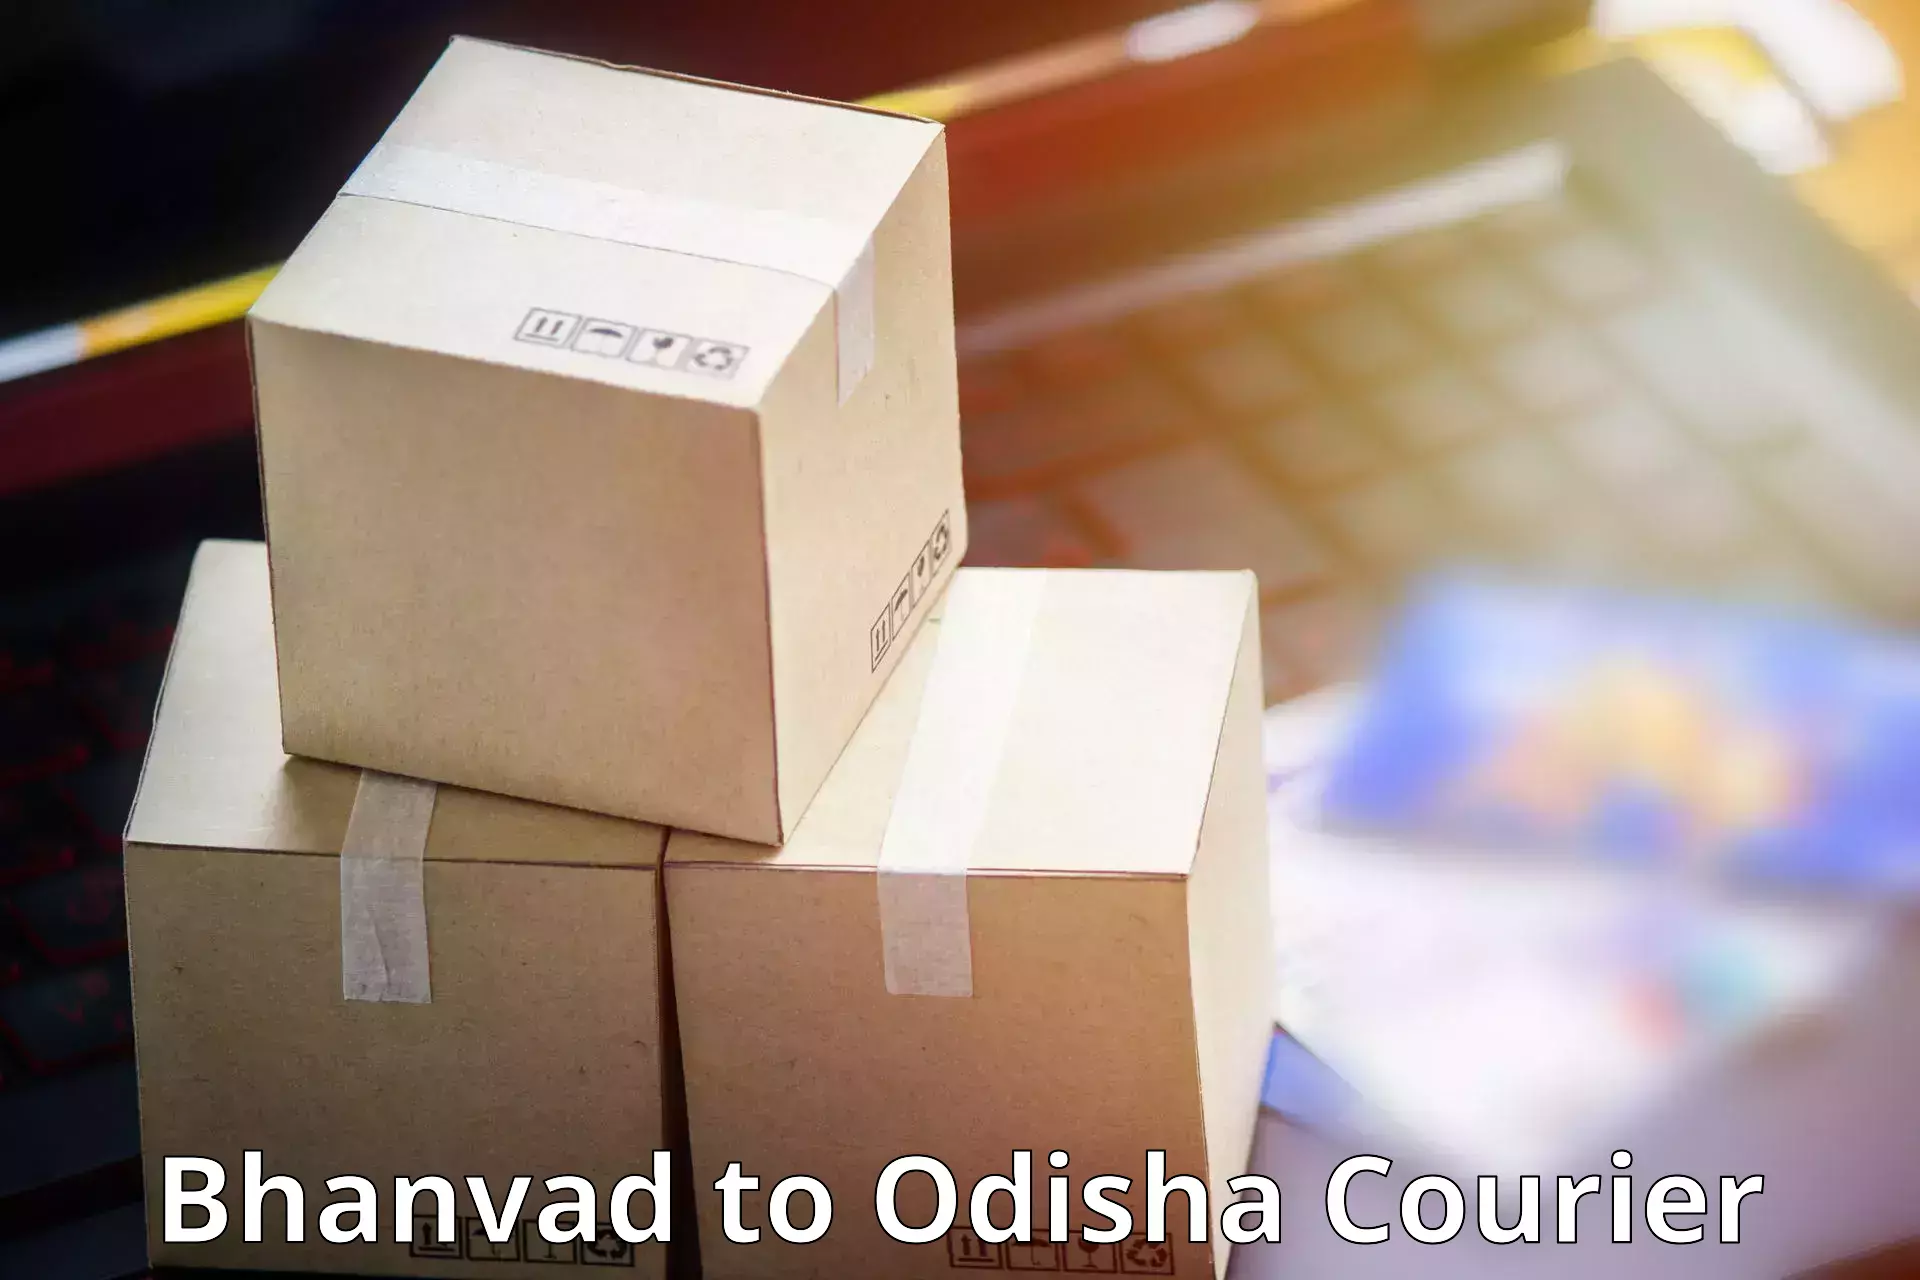 Express courier capabilities Bhanvad to Paradip Port